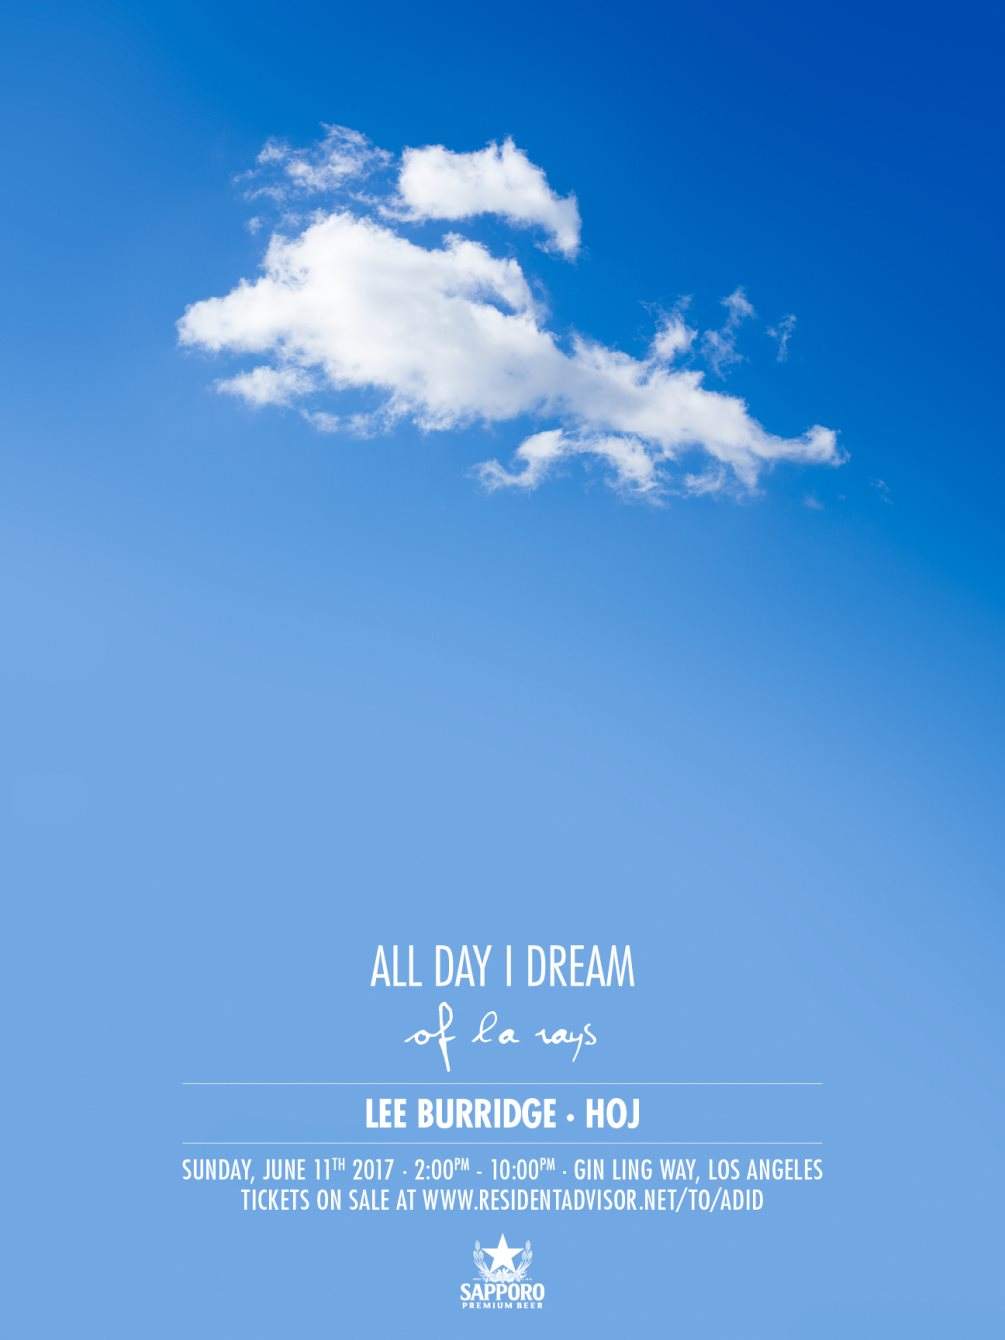 All Day I Dream of L.A. Rays - フライヤー表